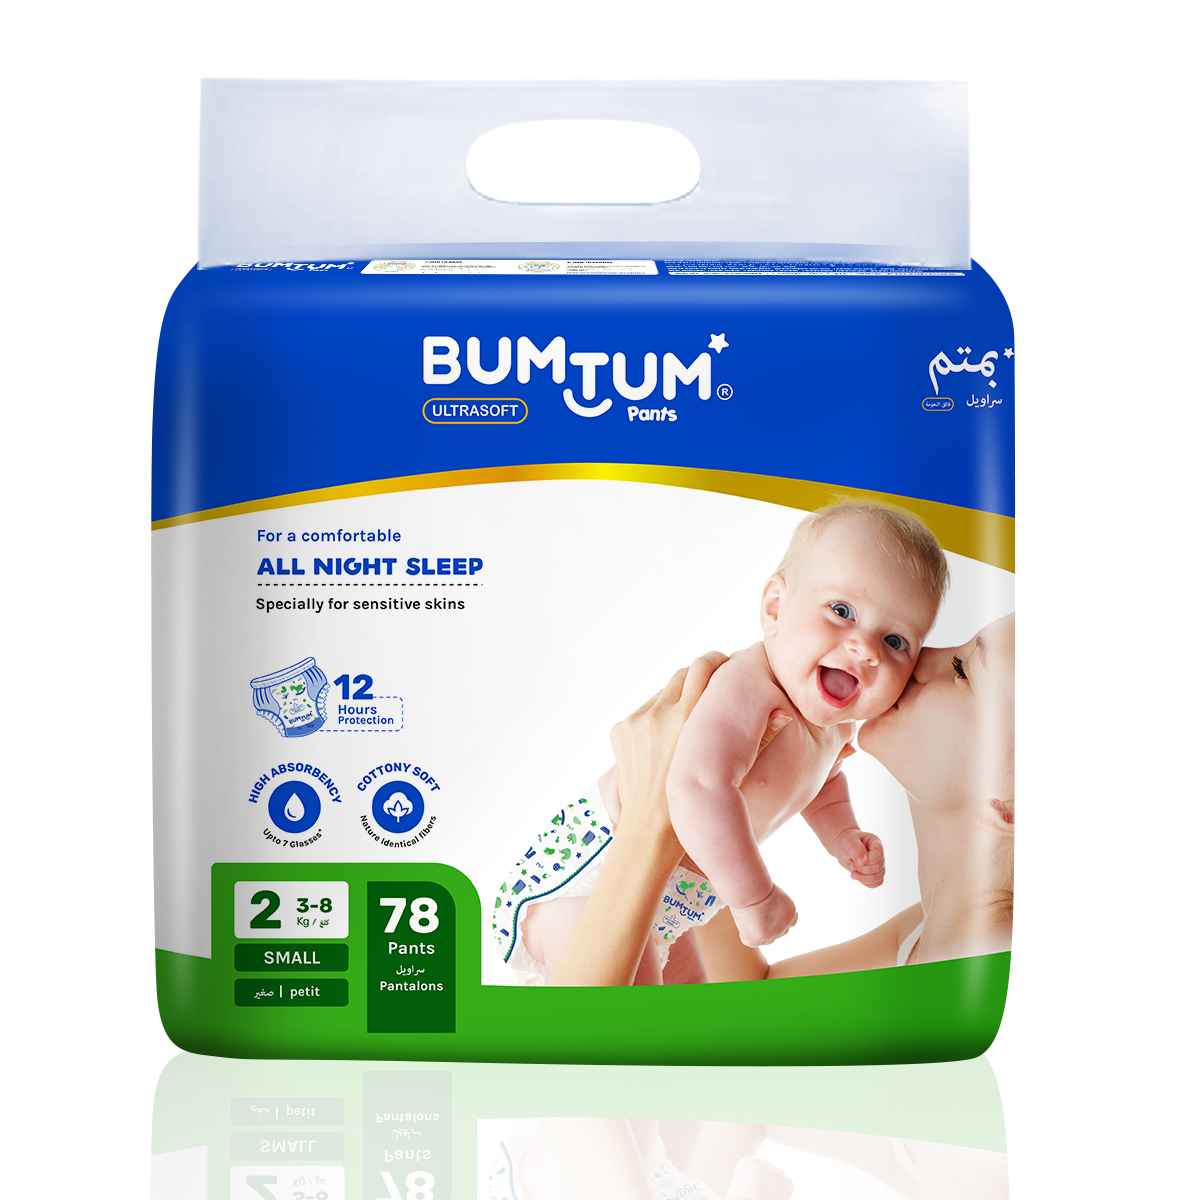 Baby :: Diapering :: Baby Diapers :: OYO BABY Diaper Premium Pants Small  size baby diapers Pants Anti Rash diapers Lotion with Aloe Vera |12 Hours  Protection (Pack of 1 Small)